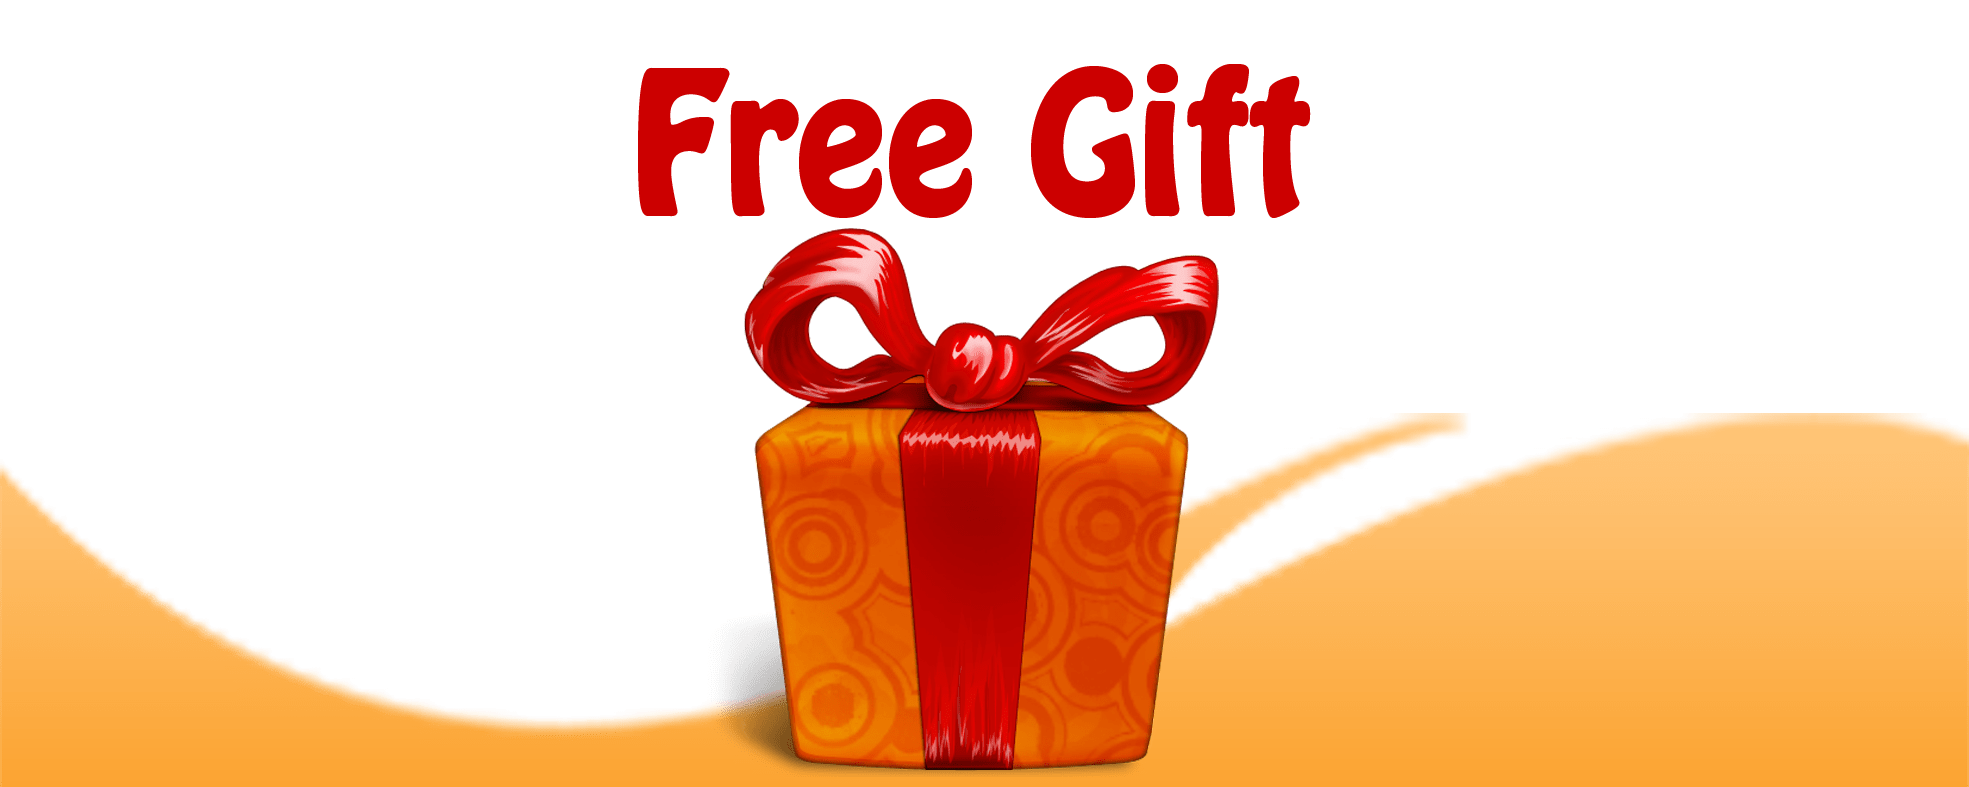 Free Gift Cate John Wesley Admirer